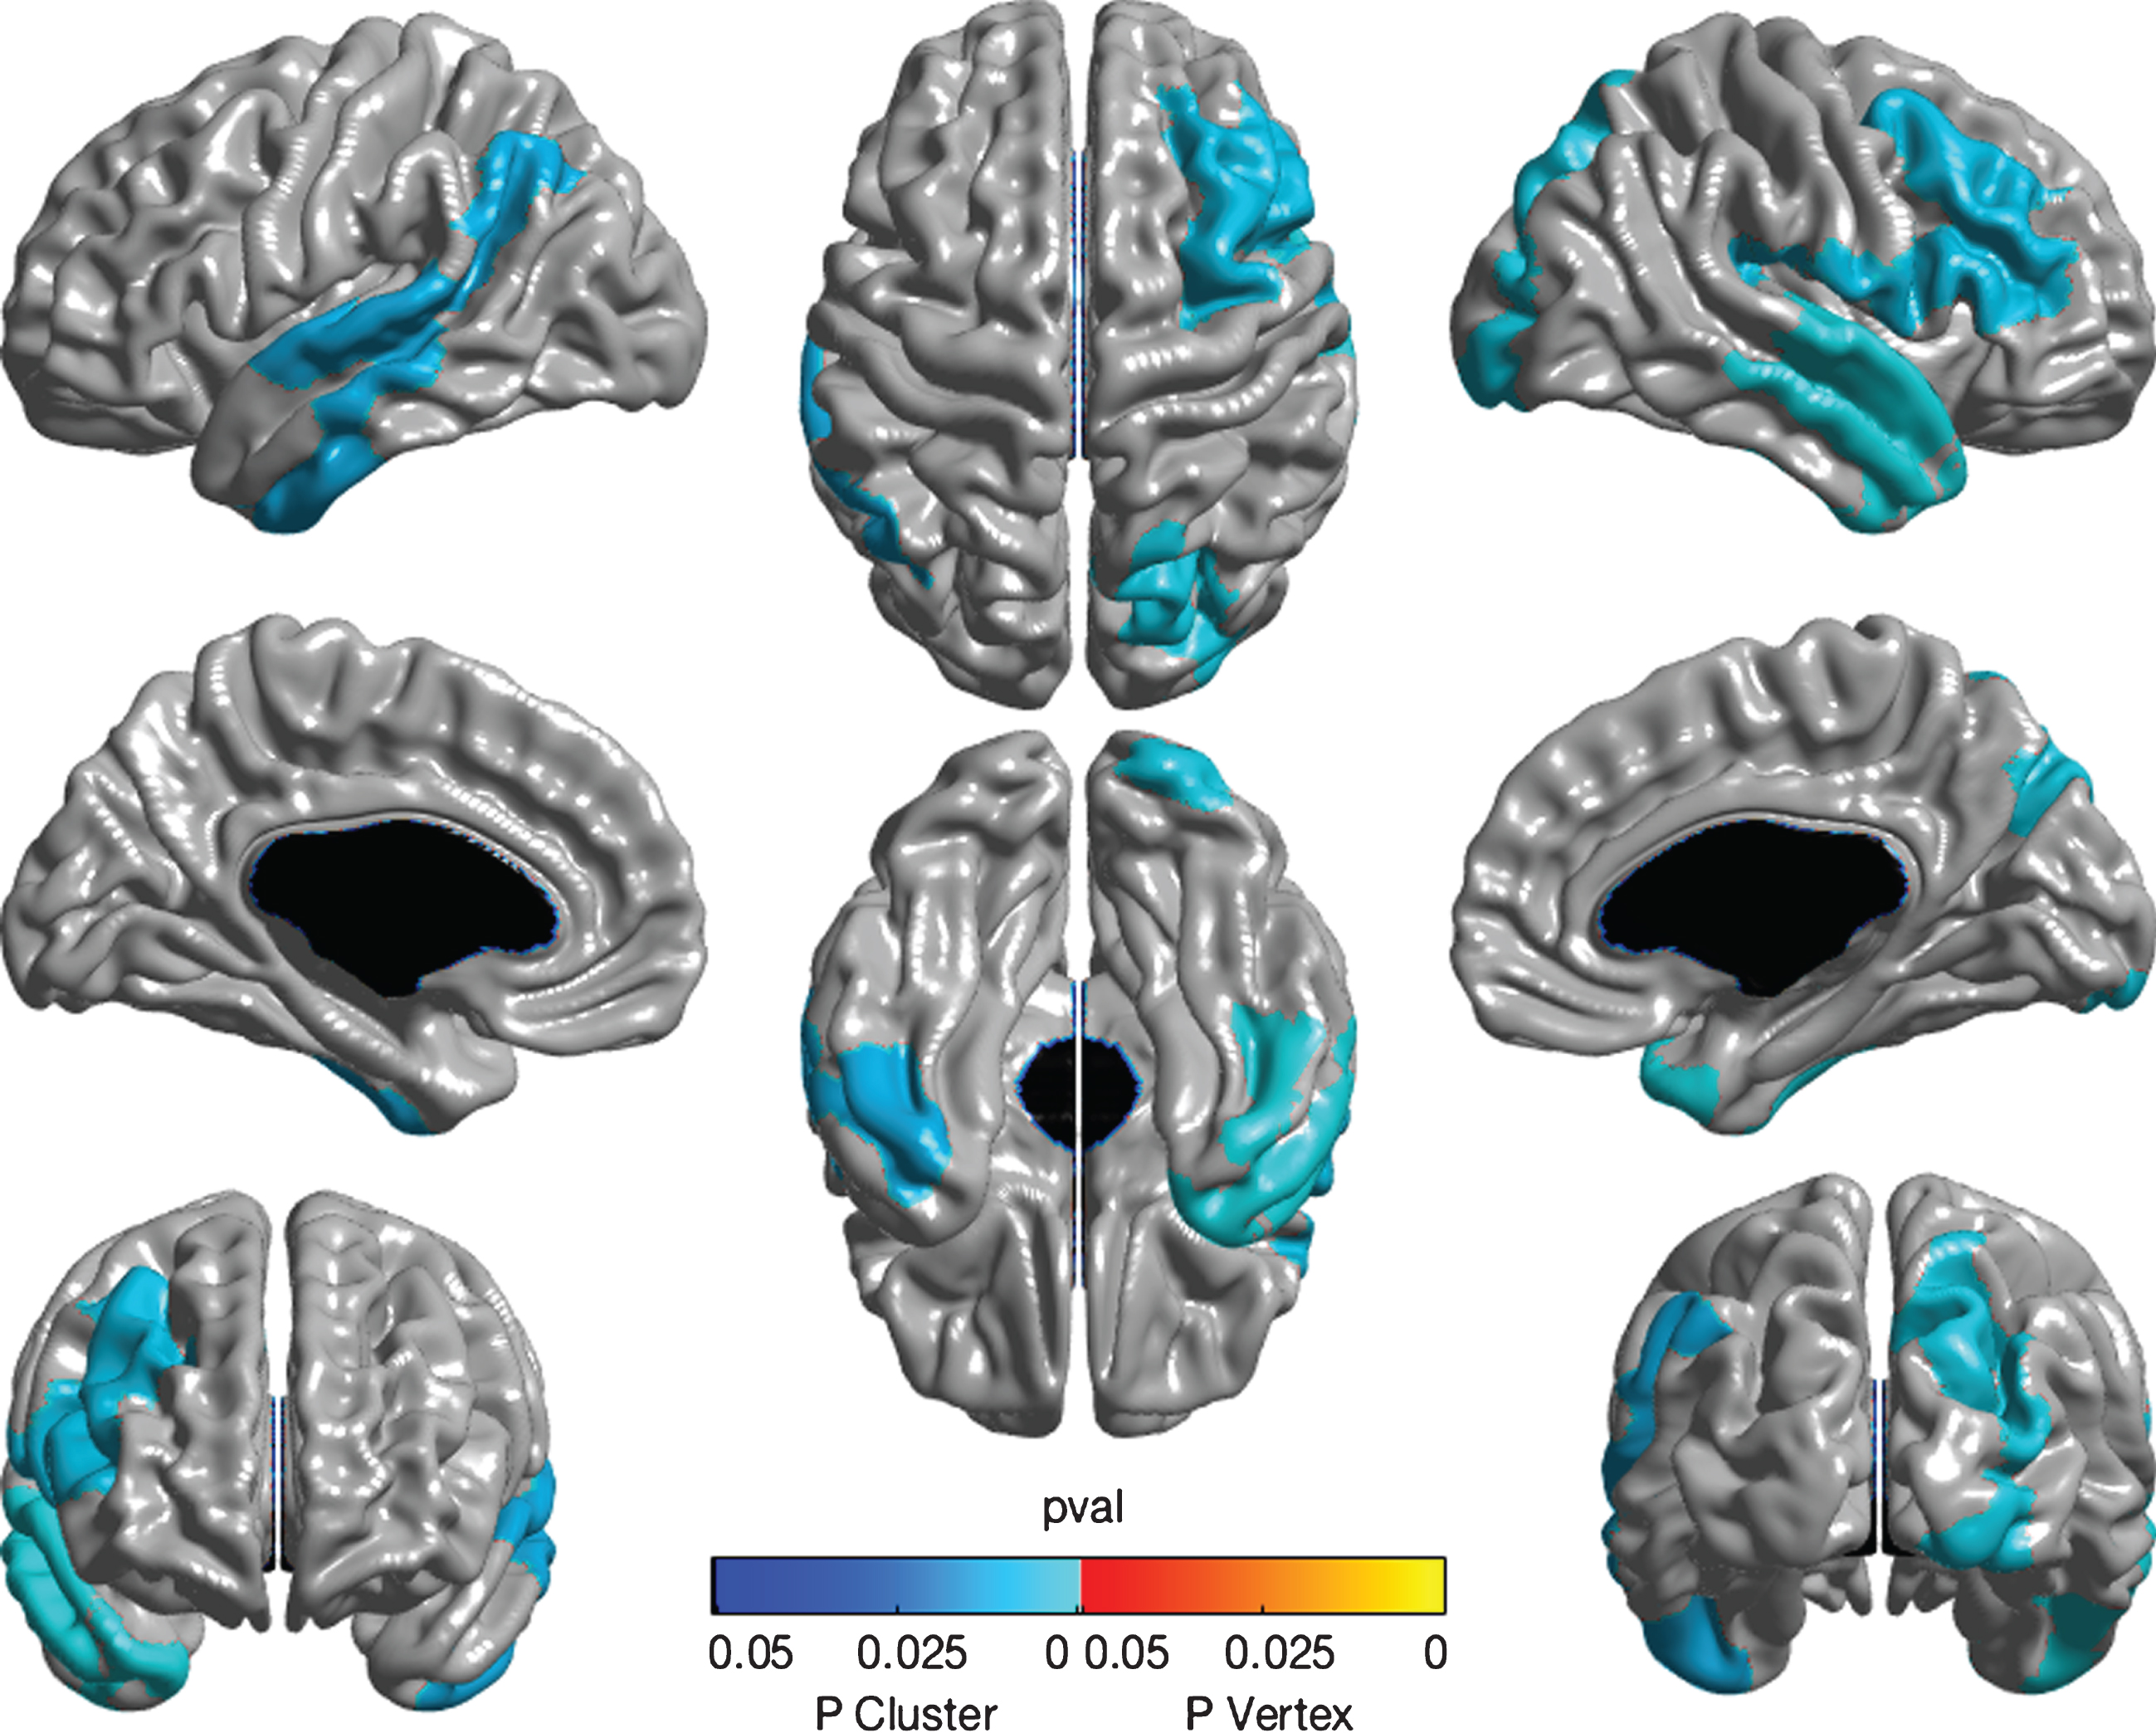 Whole brain cortical thickness measures associated with DSI-REA. Color map showing association of DSI-REA score with cortical thickness estimated using whole brain random-field theory analysis. The different image perspectives are as explained in Fig. 1. After adjustment for age, gender, education, APOE ɛ4 status, and tone test, DSI-REA score (representing presumed degeneration of transcortical auditory pathways) showed an inverse relationship with thickness of the right dorsomedial and inferior frontal cortices, as indicated in pale blue. Also shown are associations with thickness of left superior and transverse temporal cortices as well as bilateral inferior temporal gyri, right anterior temporal pole, and right precuneus. Analyses are significant at the cluster level, as shown. No significant peaks are observed.